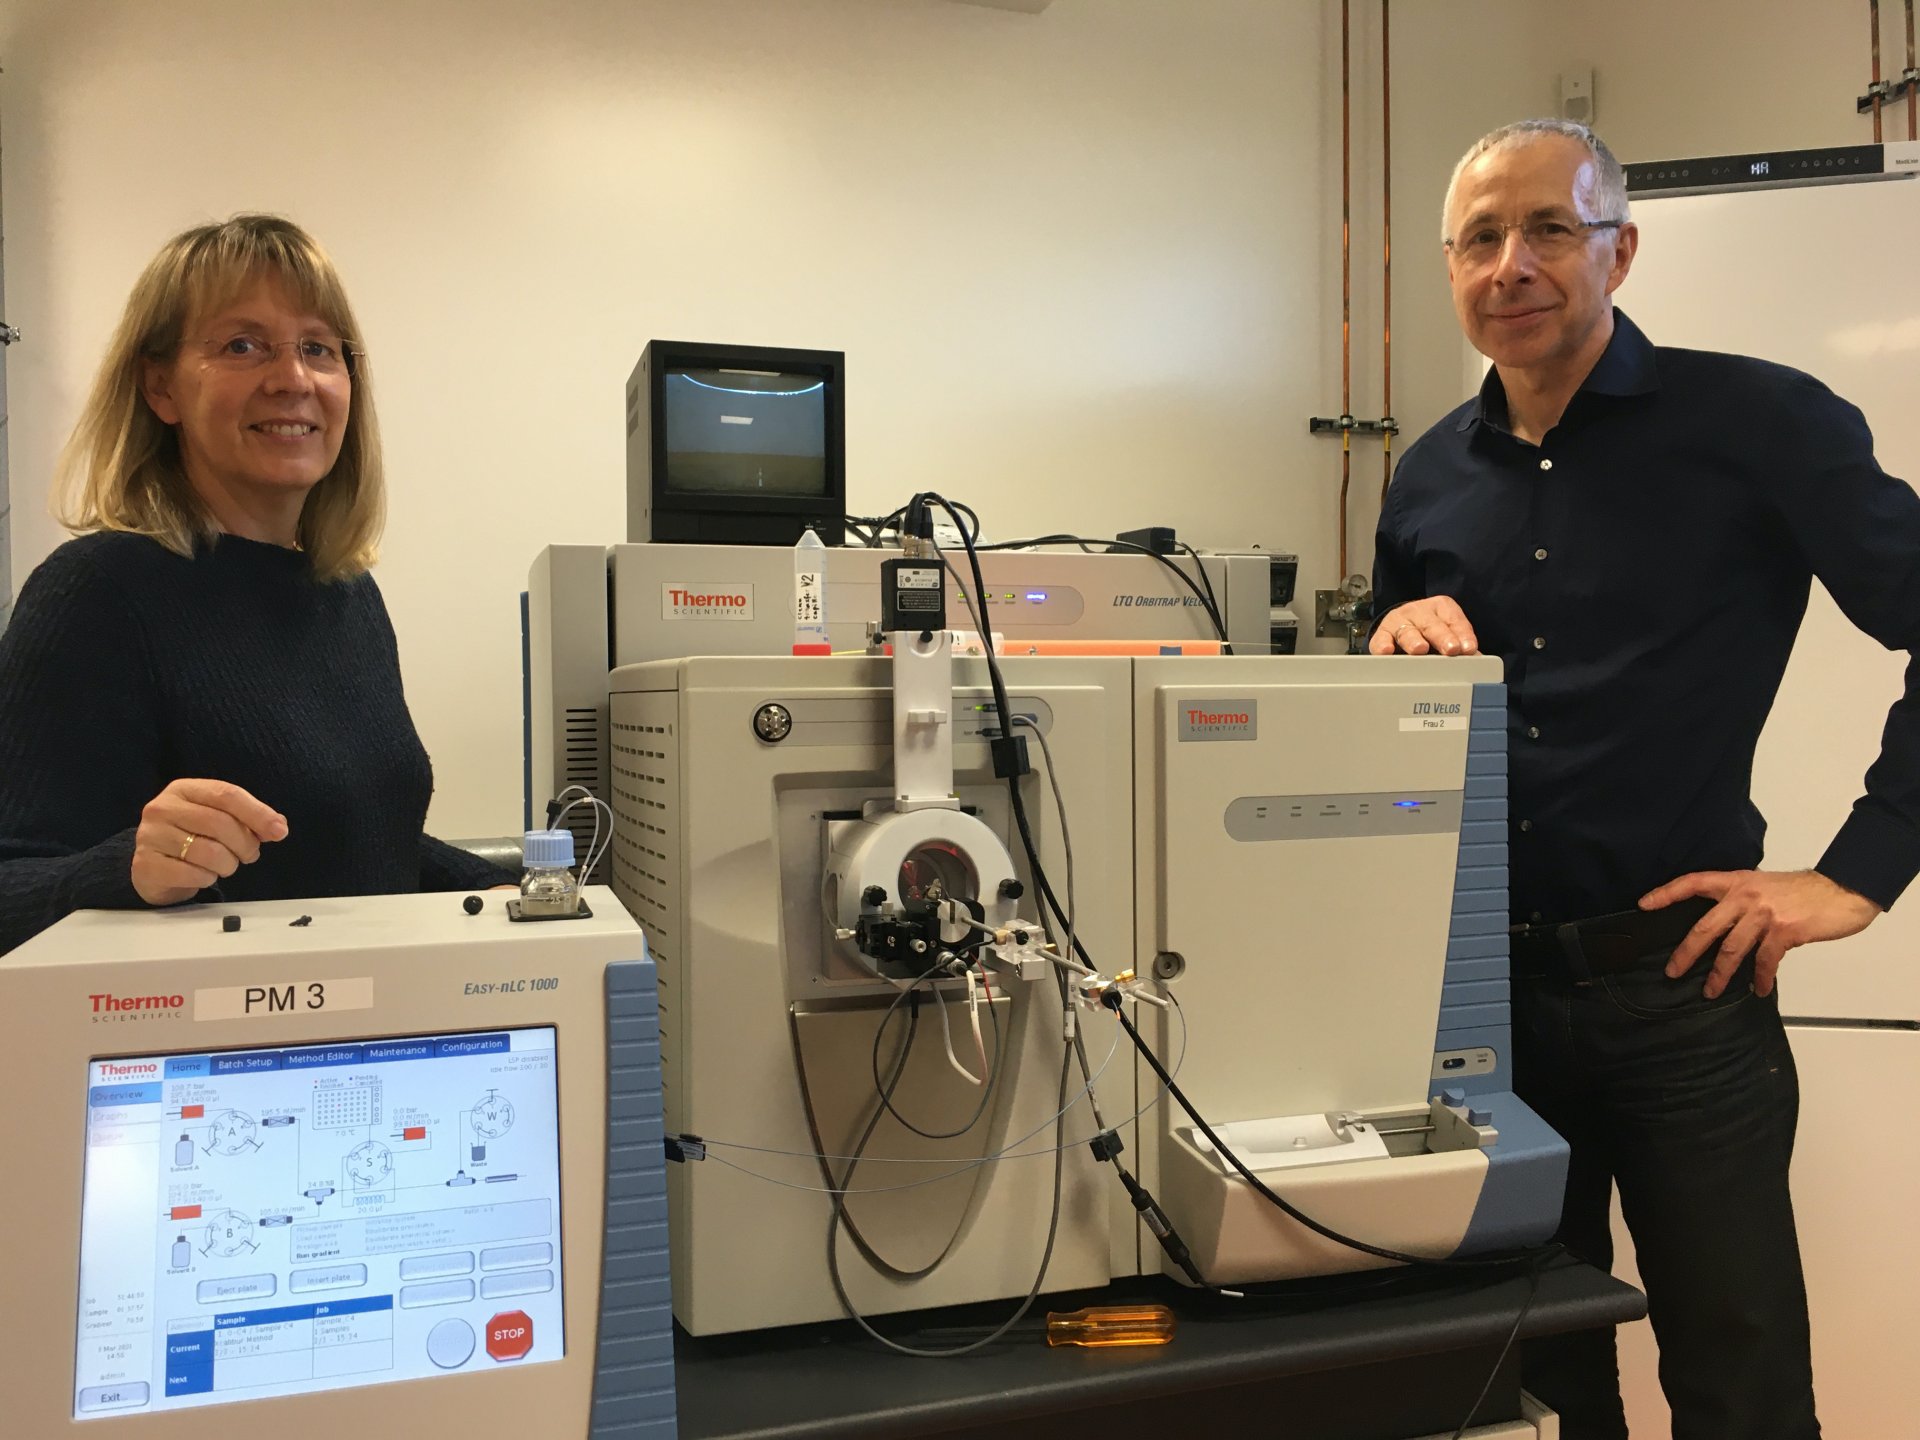 Co-authors Dörte Becher and Thomas Schweder from the University of Greifswald in front of the mass spectrometer used in this study. © Institute for Microbiology, University of Greifswald / D.Becher 